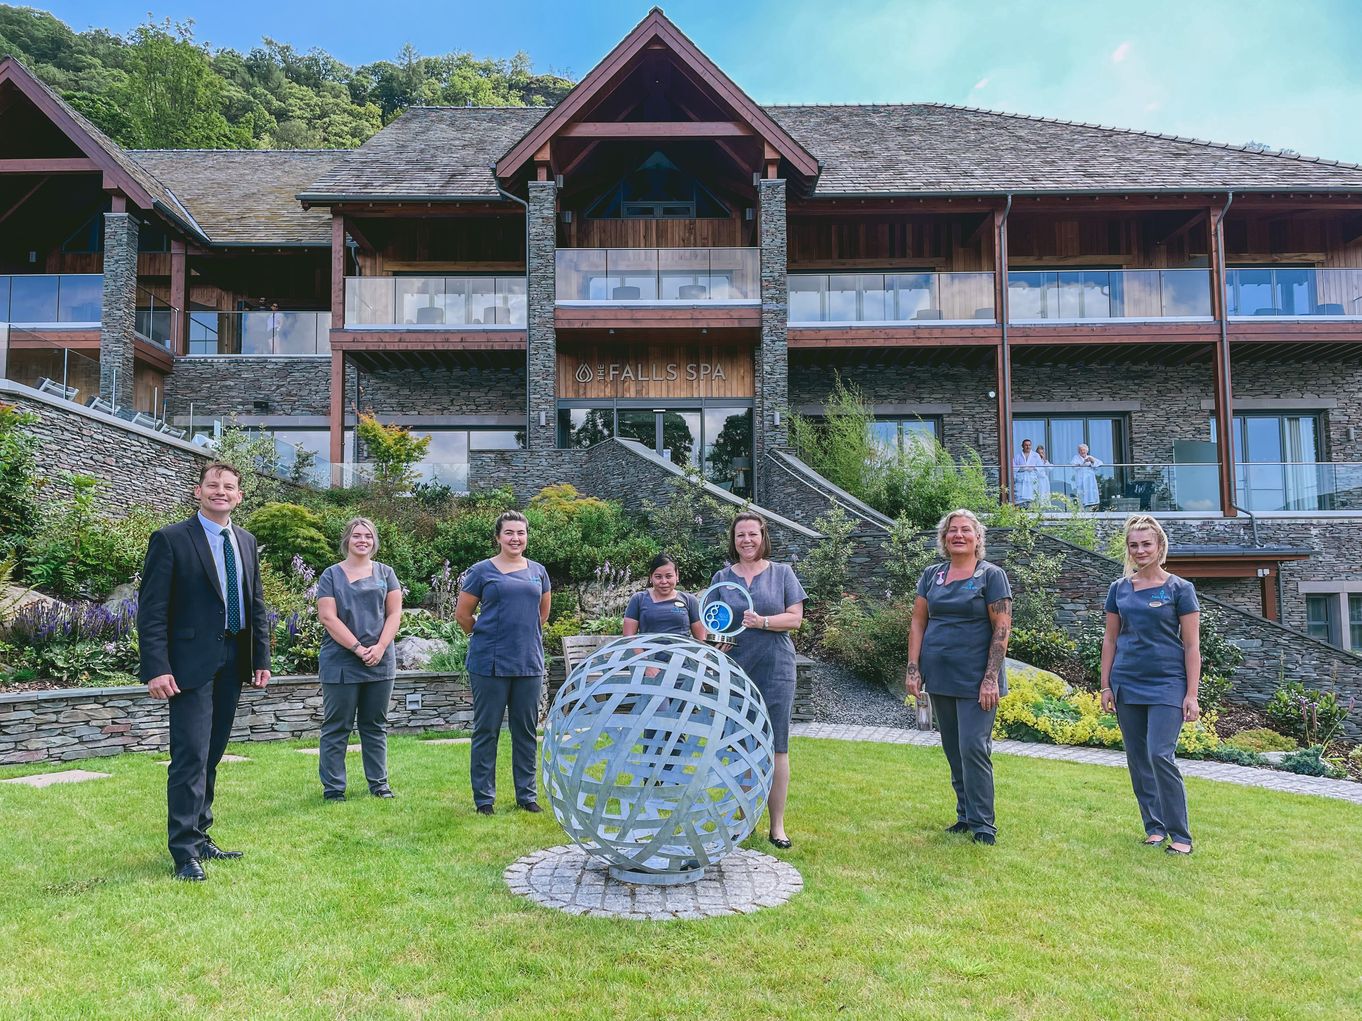 General Manager Marcell Cilliers, Spa Manager Davina Hassell and The Falls Spa team with Good Spa Guide award 